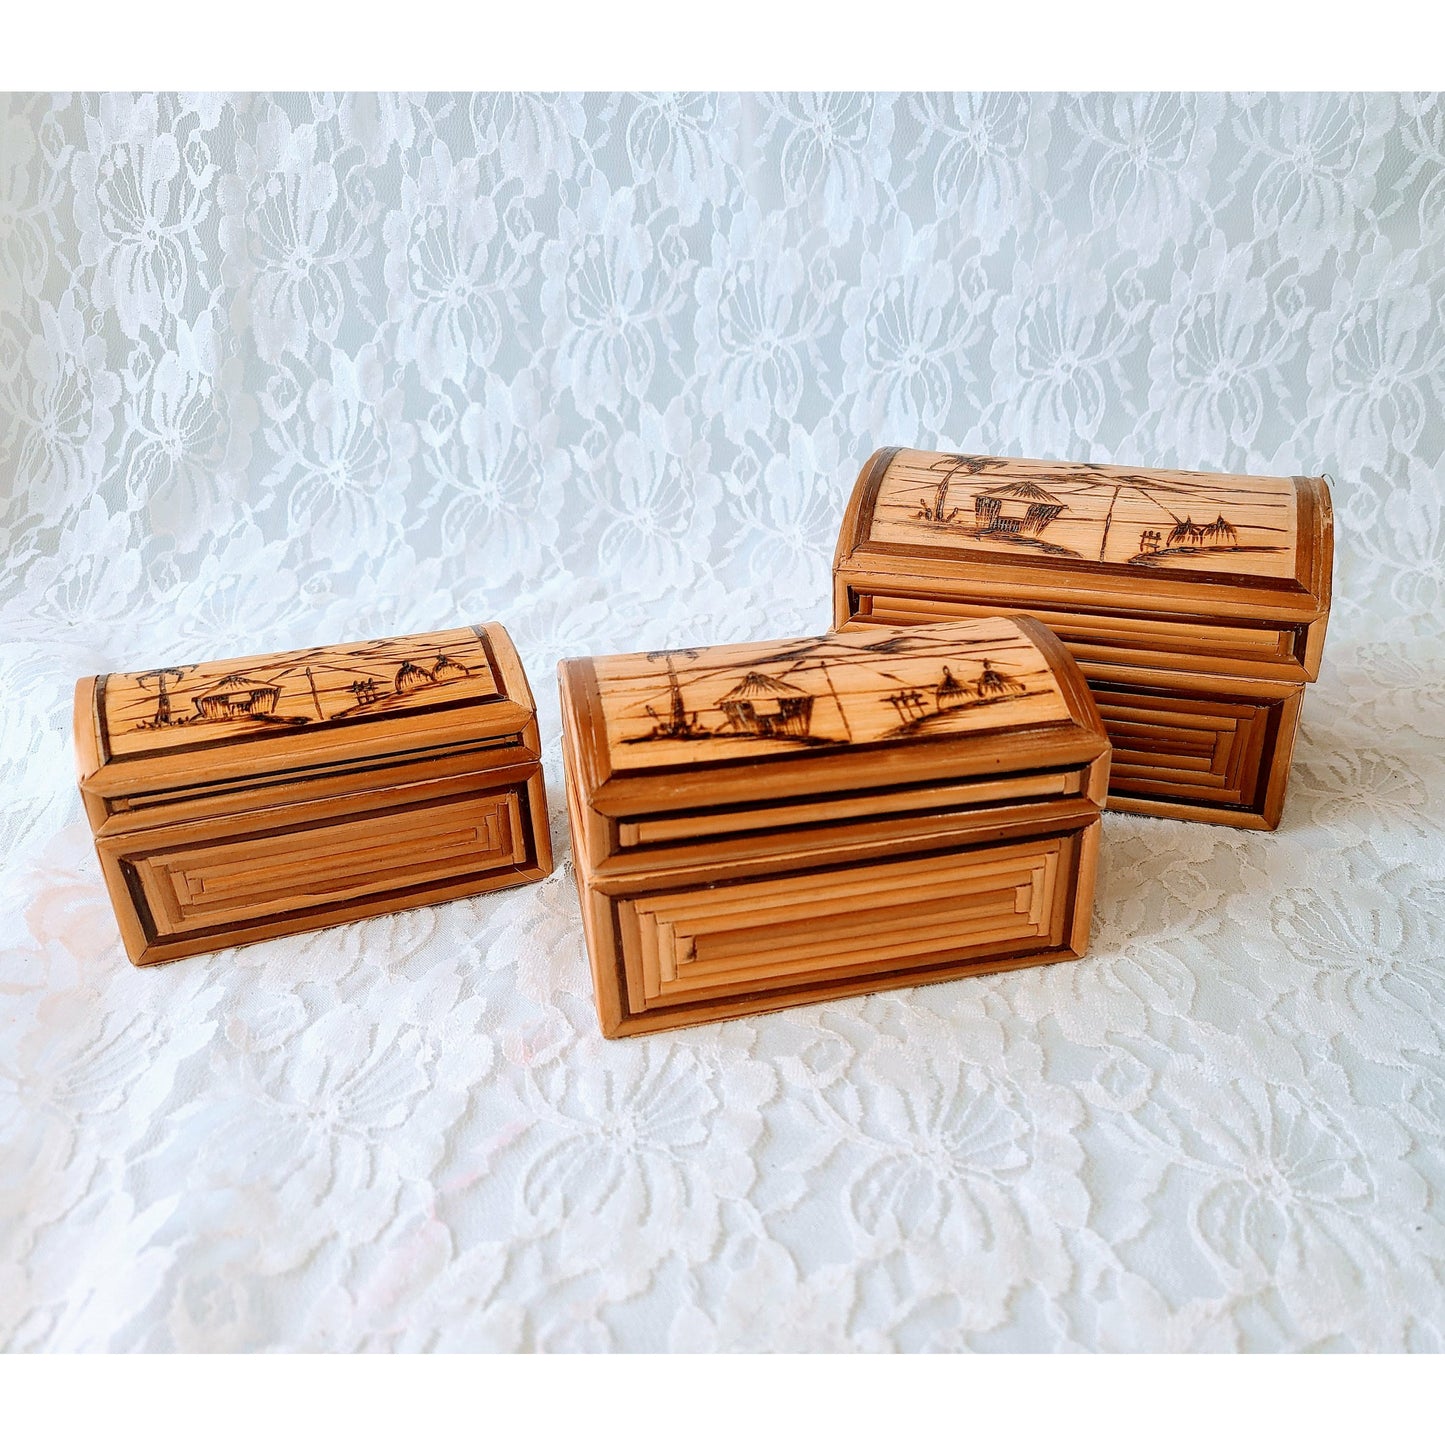 Vintage Hand Painted Indonesian Nesting Bamboo Boxes ~ Intricate Wood Burning Design ~ Red Velvet Inside